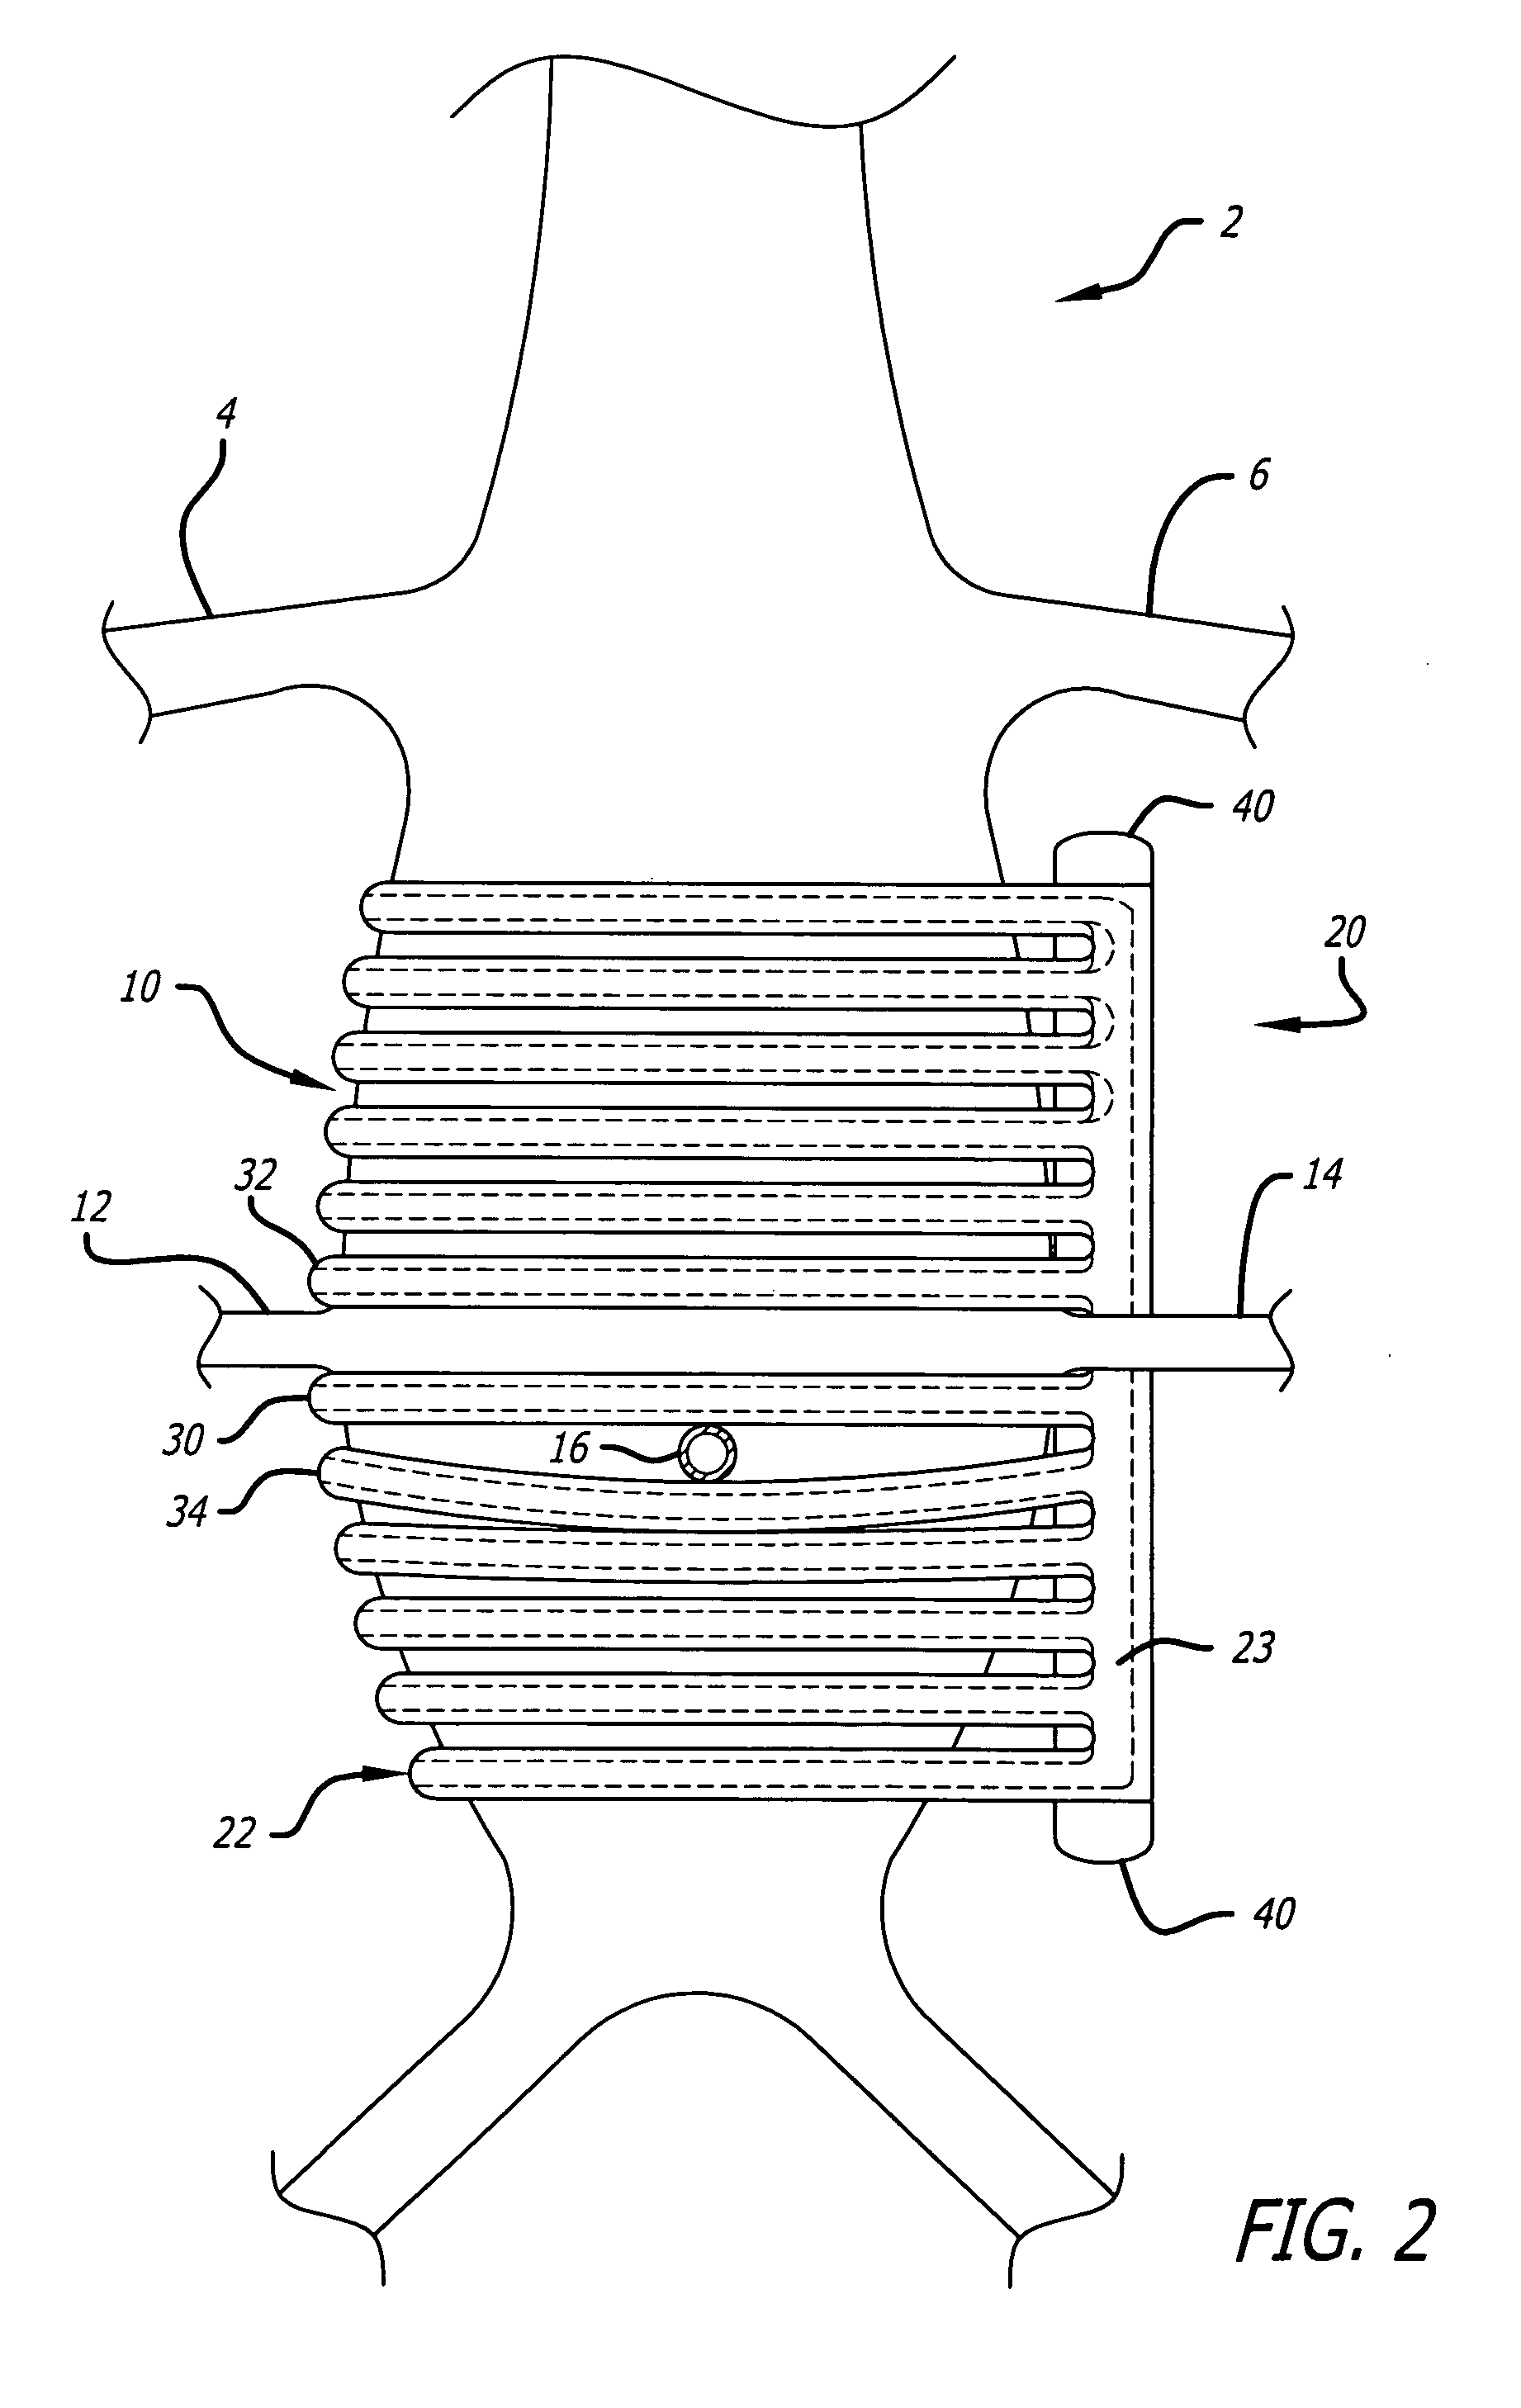 Aneurysm treatment system and method